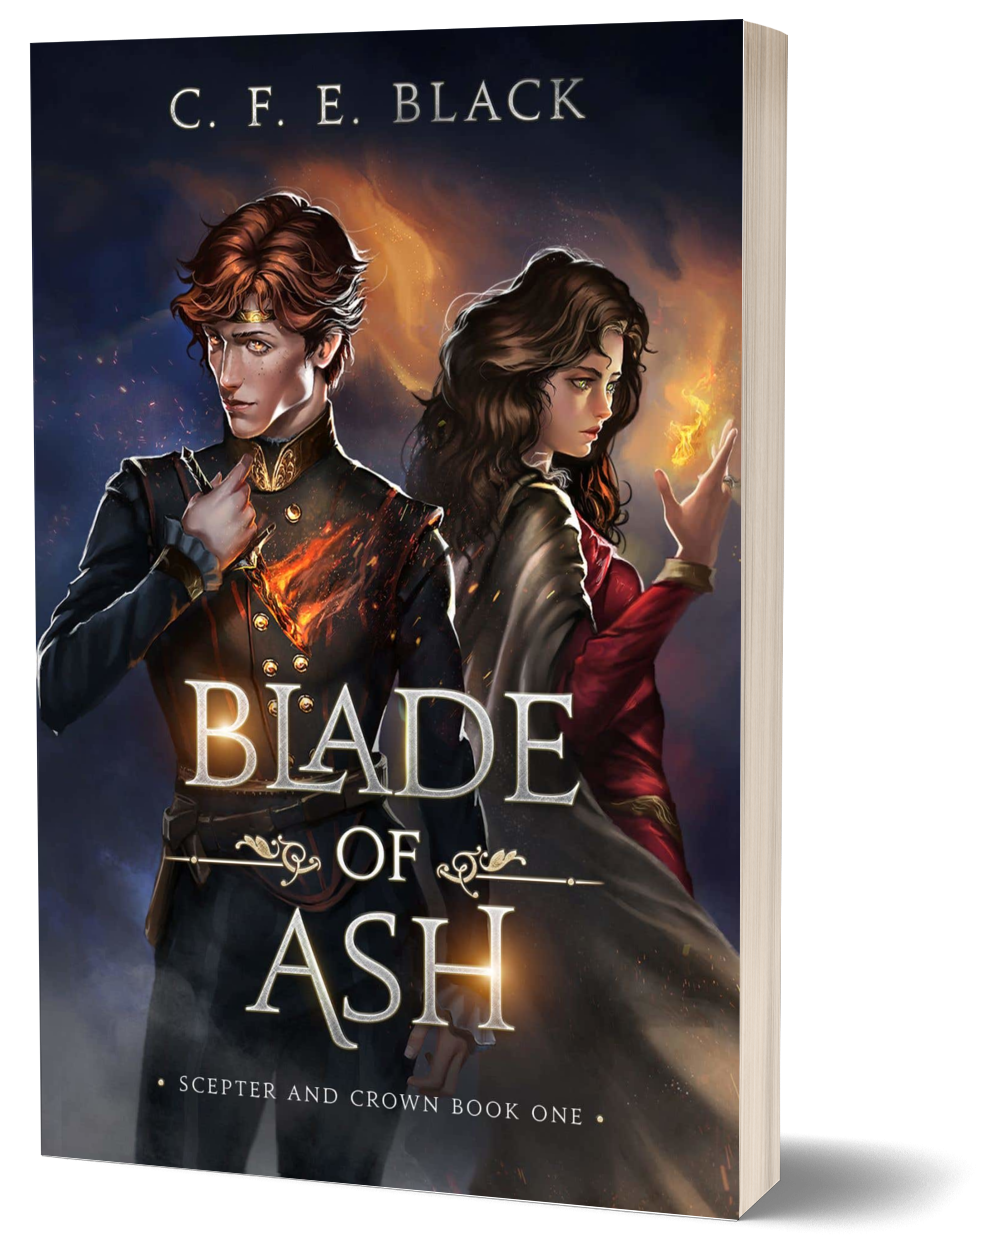 Blade of Ash Scepter and Crown Book 1 paperback cover